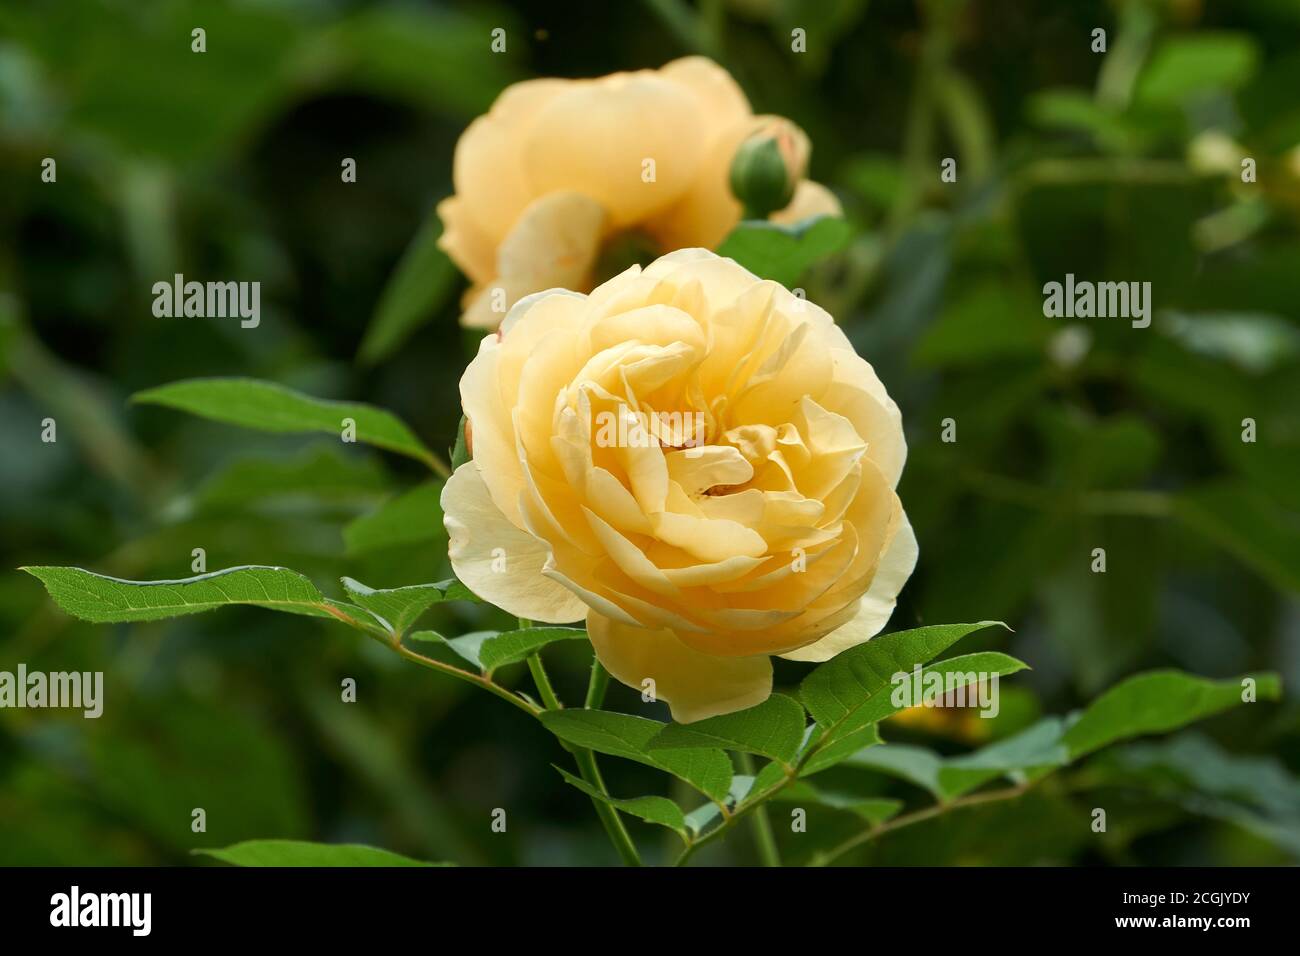 Closeup of a large yellow rose blooming in late summer Stock Photo